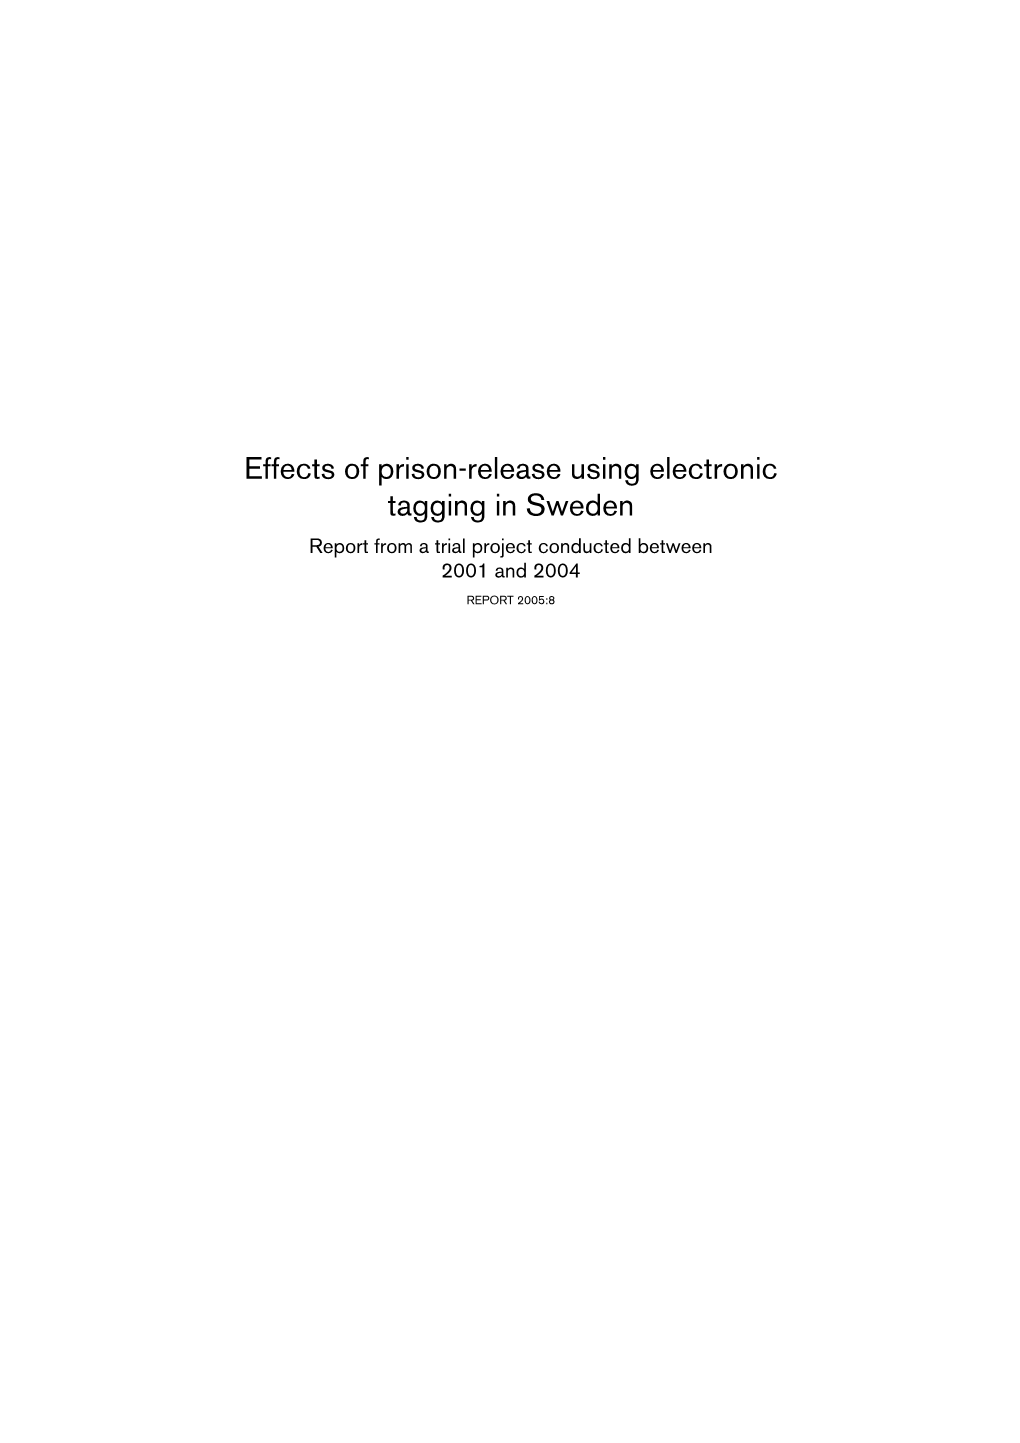 Effects of Prison-Release Using Electronic Tagging in Sweden Report from a Trial Project Conducted Between 2001 and 2004